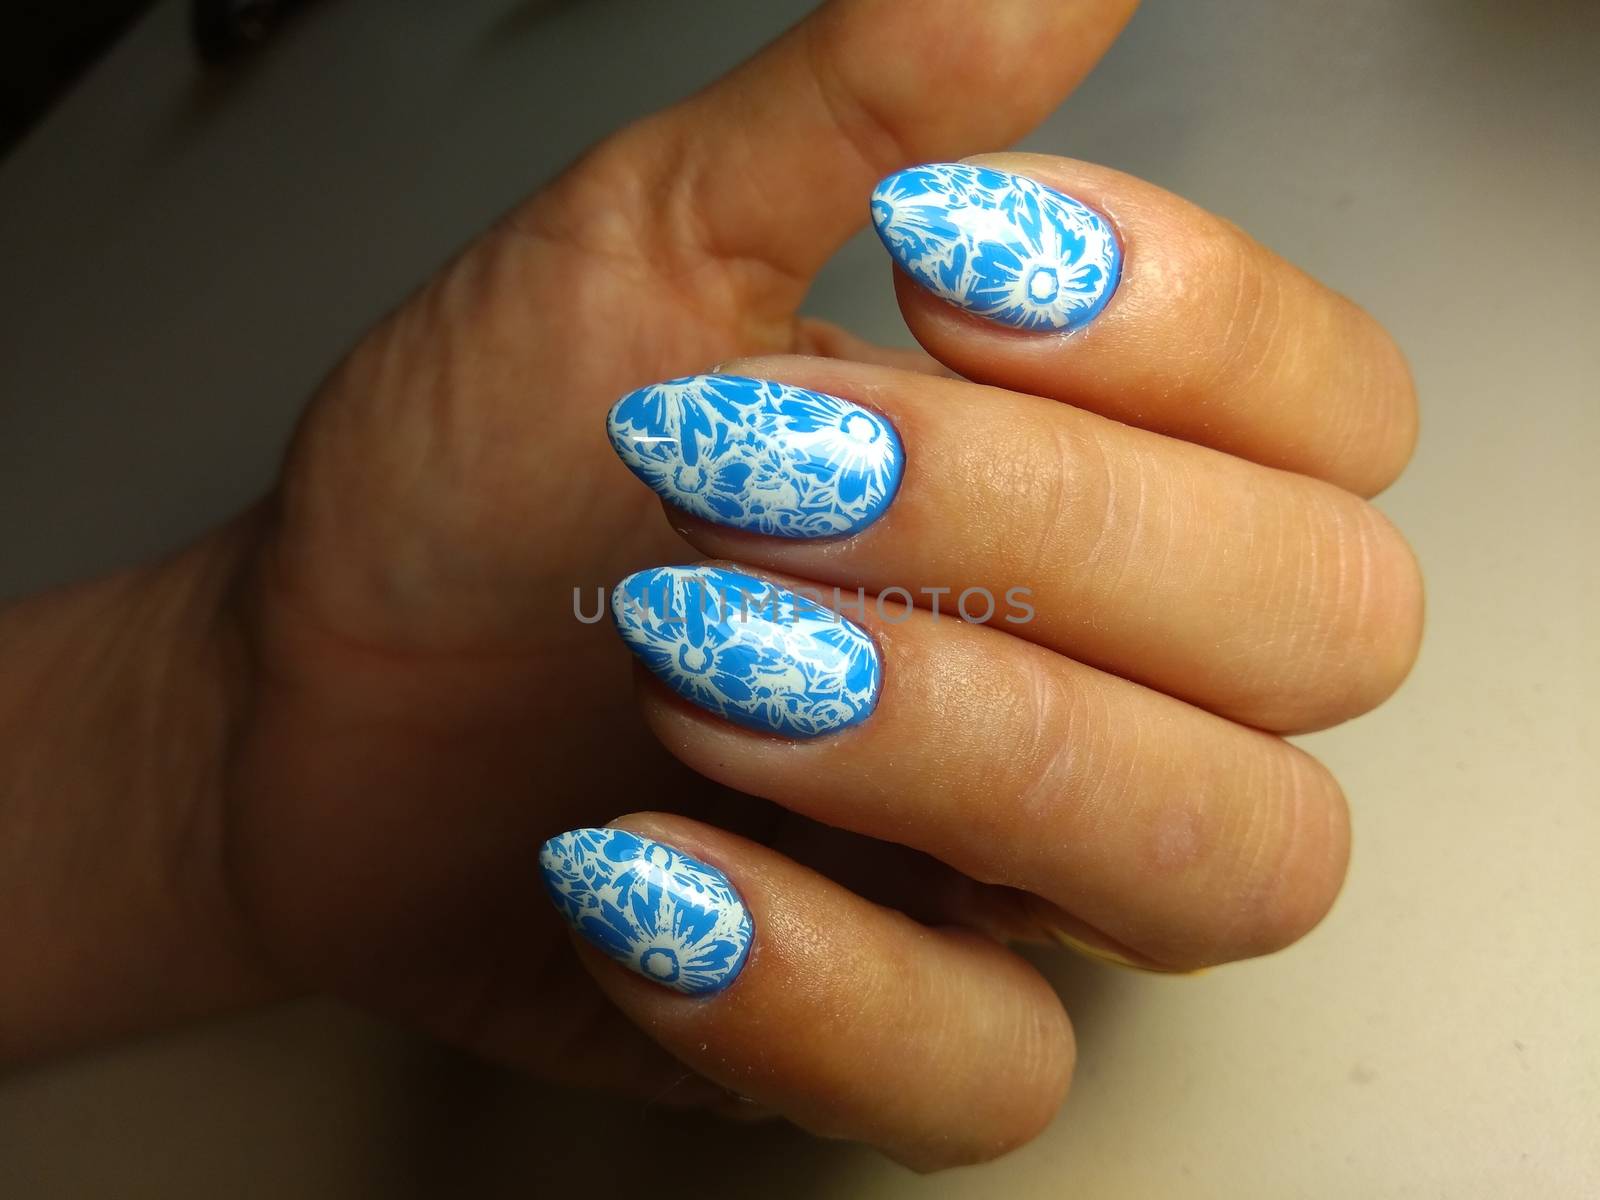 Here is presented one of the best manicure designs this year's Nail Marine